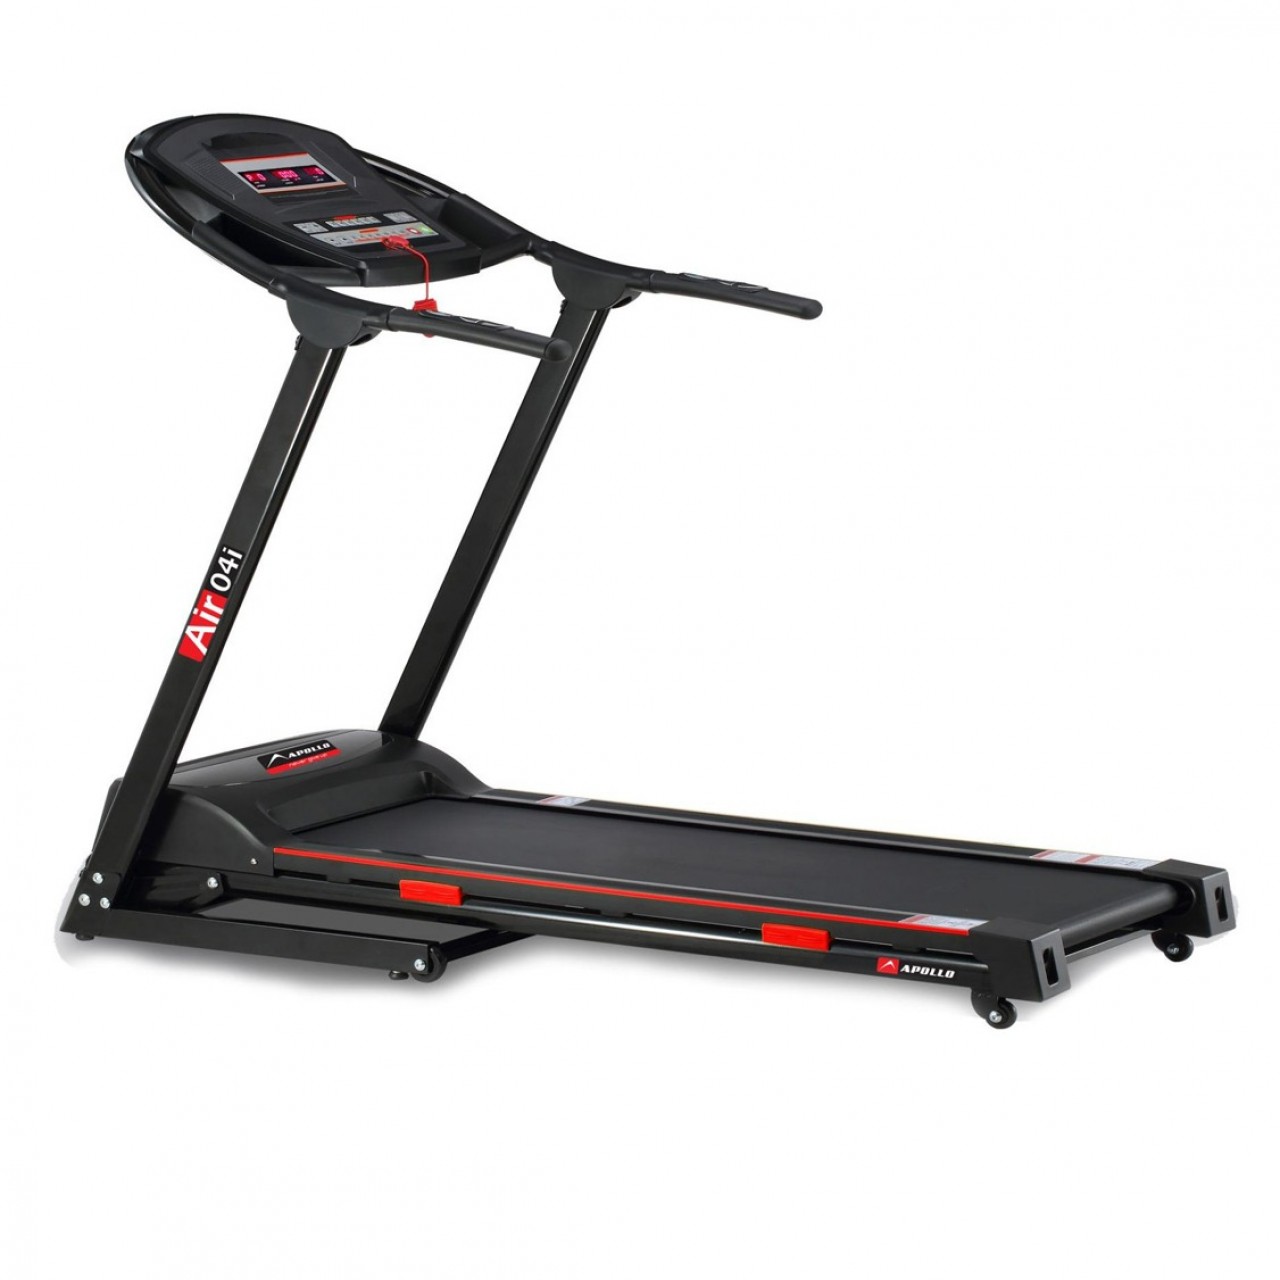 Apolo Air 04 Treadmill For Exercising - Holds Weight Up To 120kg